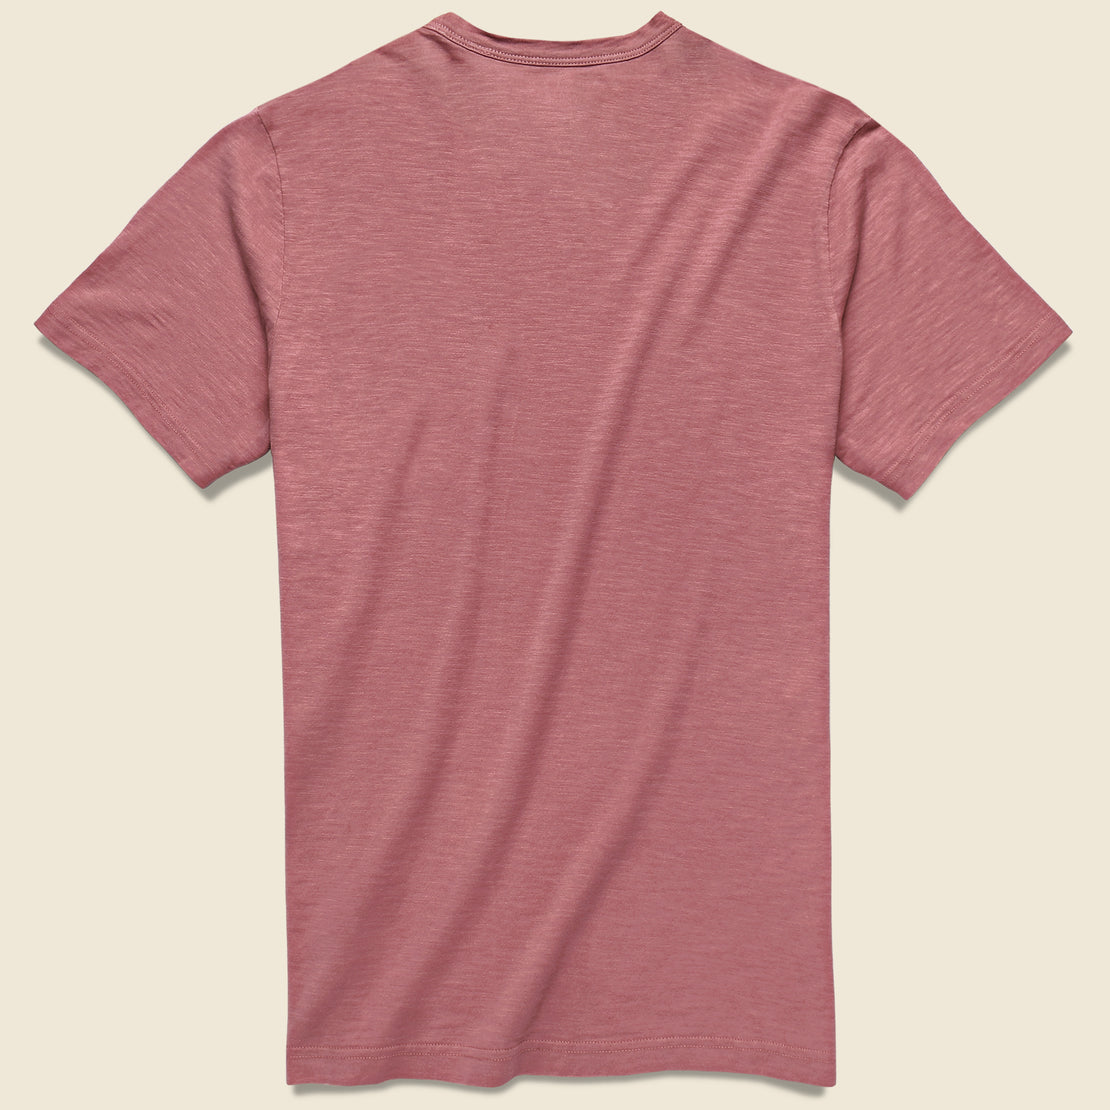 Garment Dyed Pocket Tee - Plum Wine - Faherty - STAG Provisions - Tops - S/S Tee